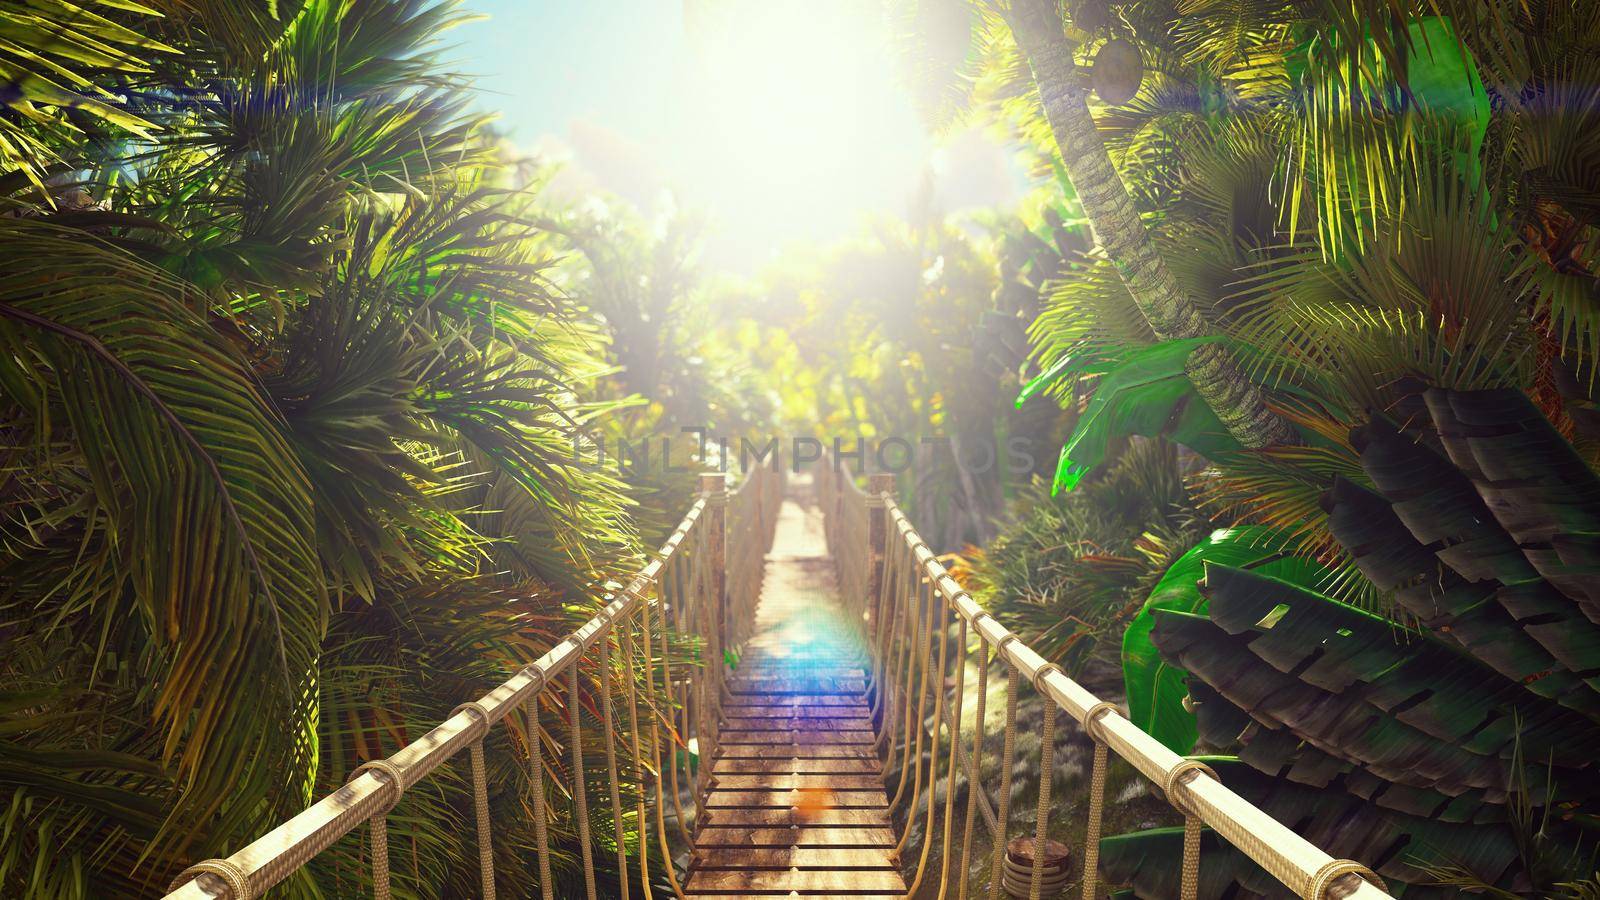 Wooden bridge over the green jungle. Green jungle trees and palm trees with blue sky and bright sun. 3D Rendering by designprojects